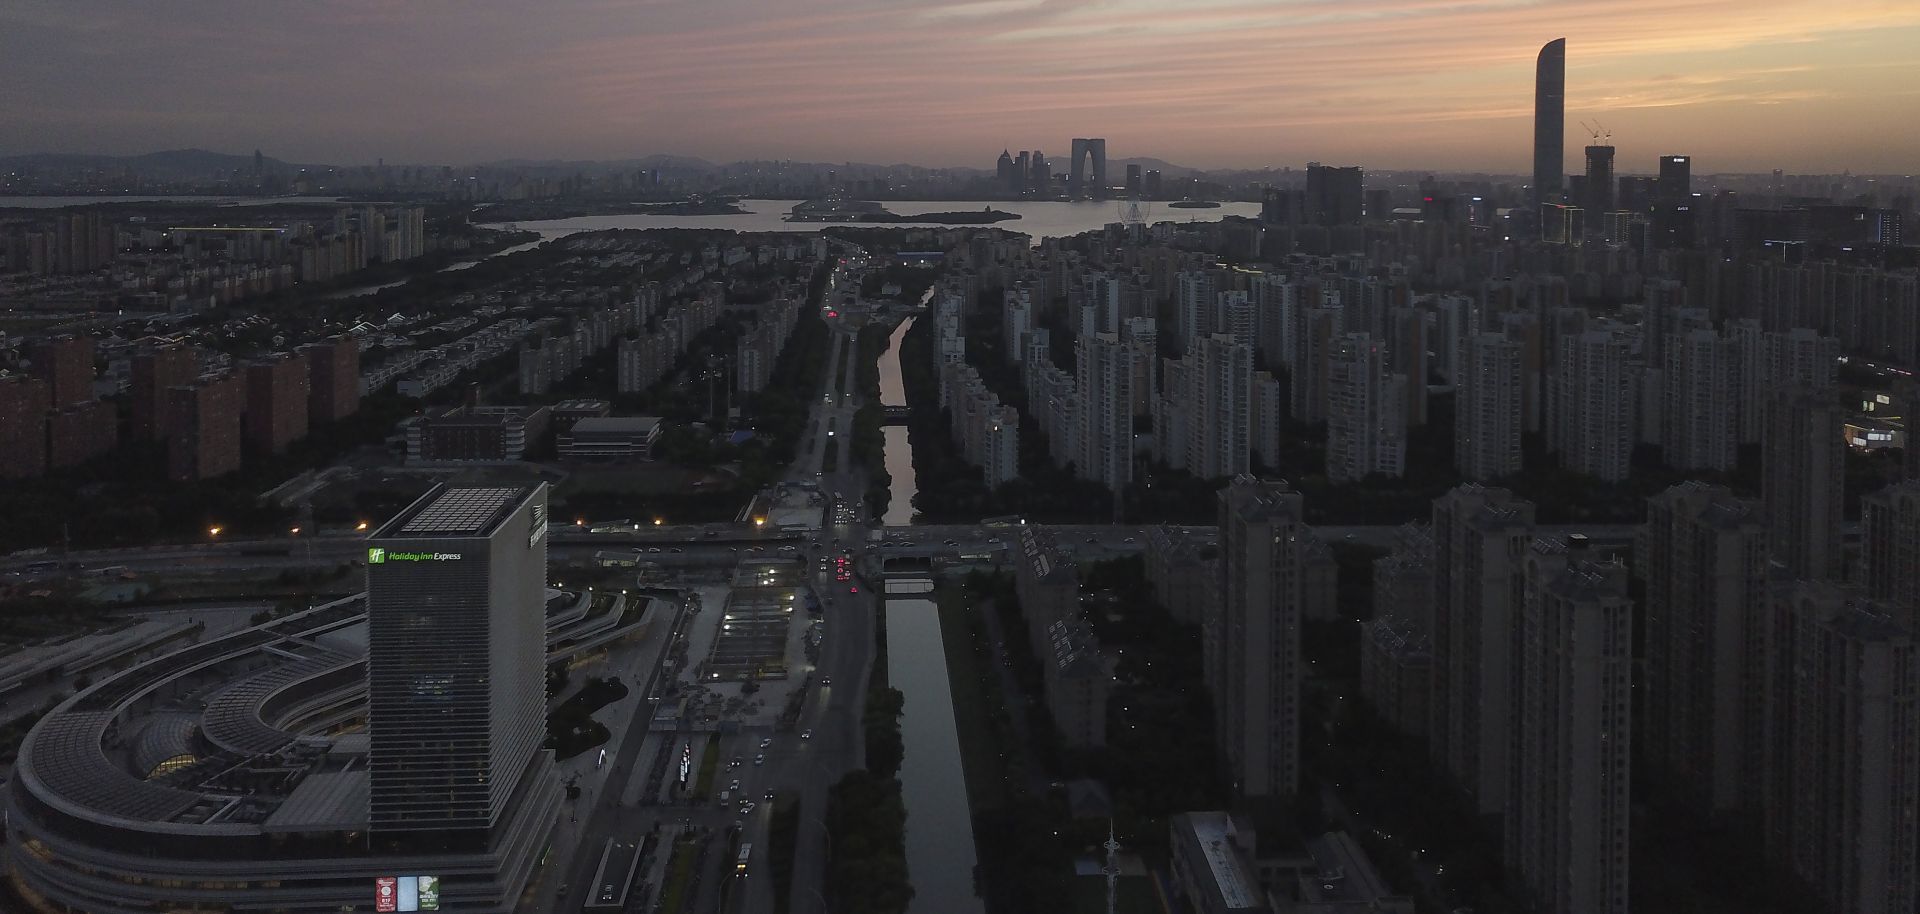 A photo taken on May 31, 2021, shows the skyline of Suzhou, China, at sunset.